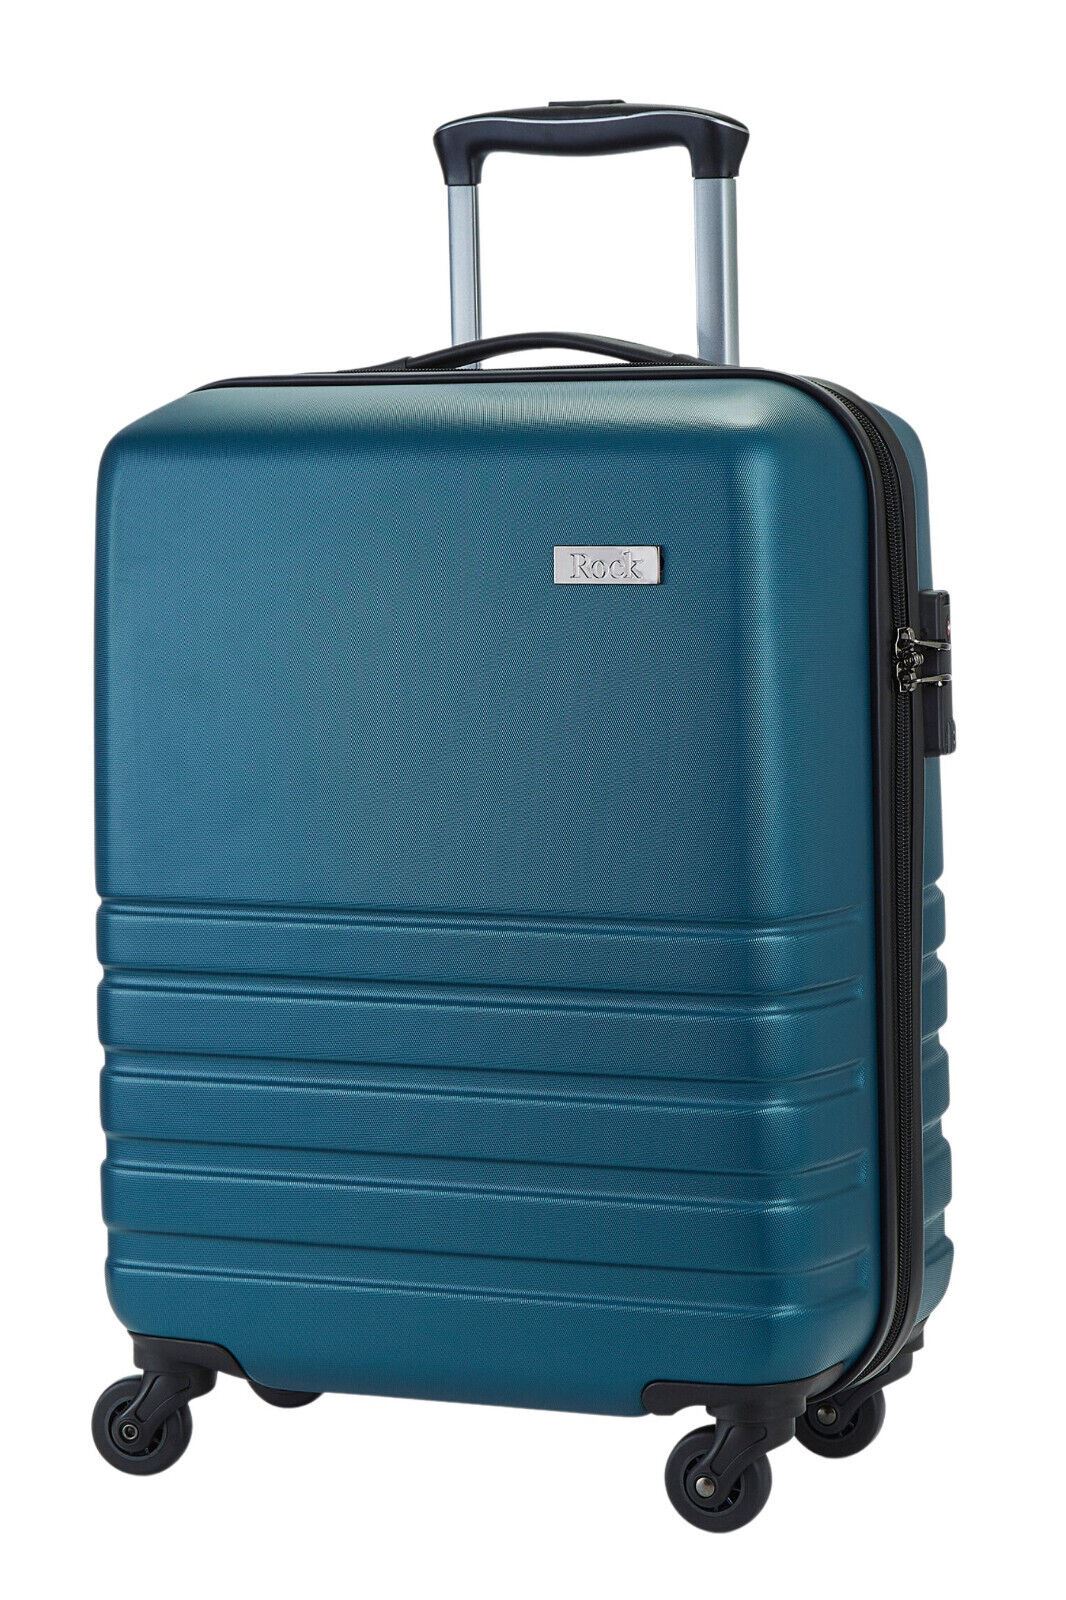 Hard Shell Teal Blue Suitcase Set 4 Wheel Cabin Luggage Trolley Travel Bag - Upperclass Fashions 